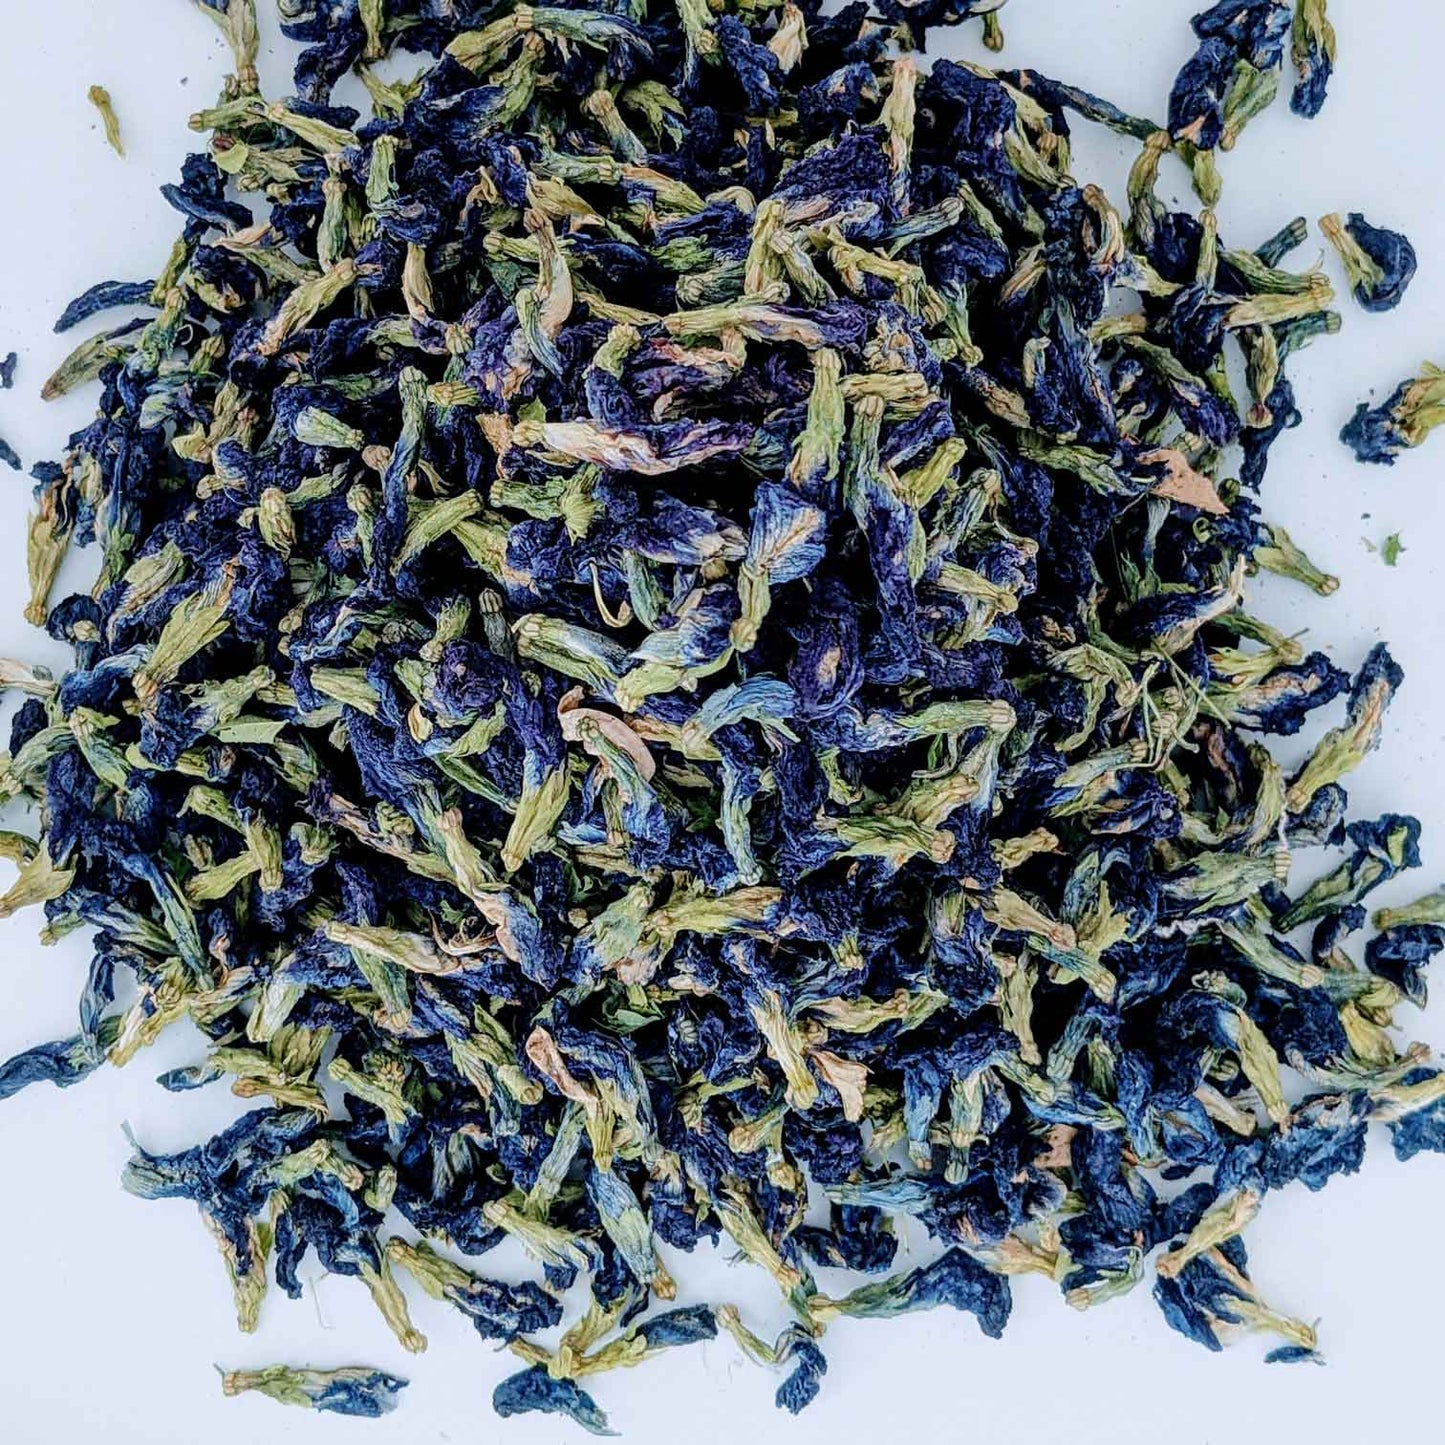 3kg+ Dried Blue Butterfly Pea Flowers - The Perfect Ingredient for Herbal Teas, Smoothies, and Cocktails | Ceylon Organic-6